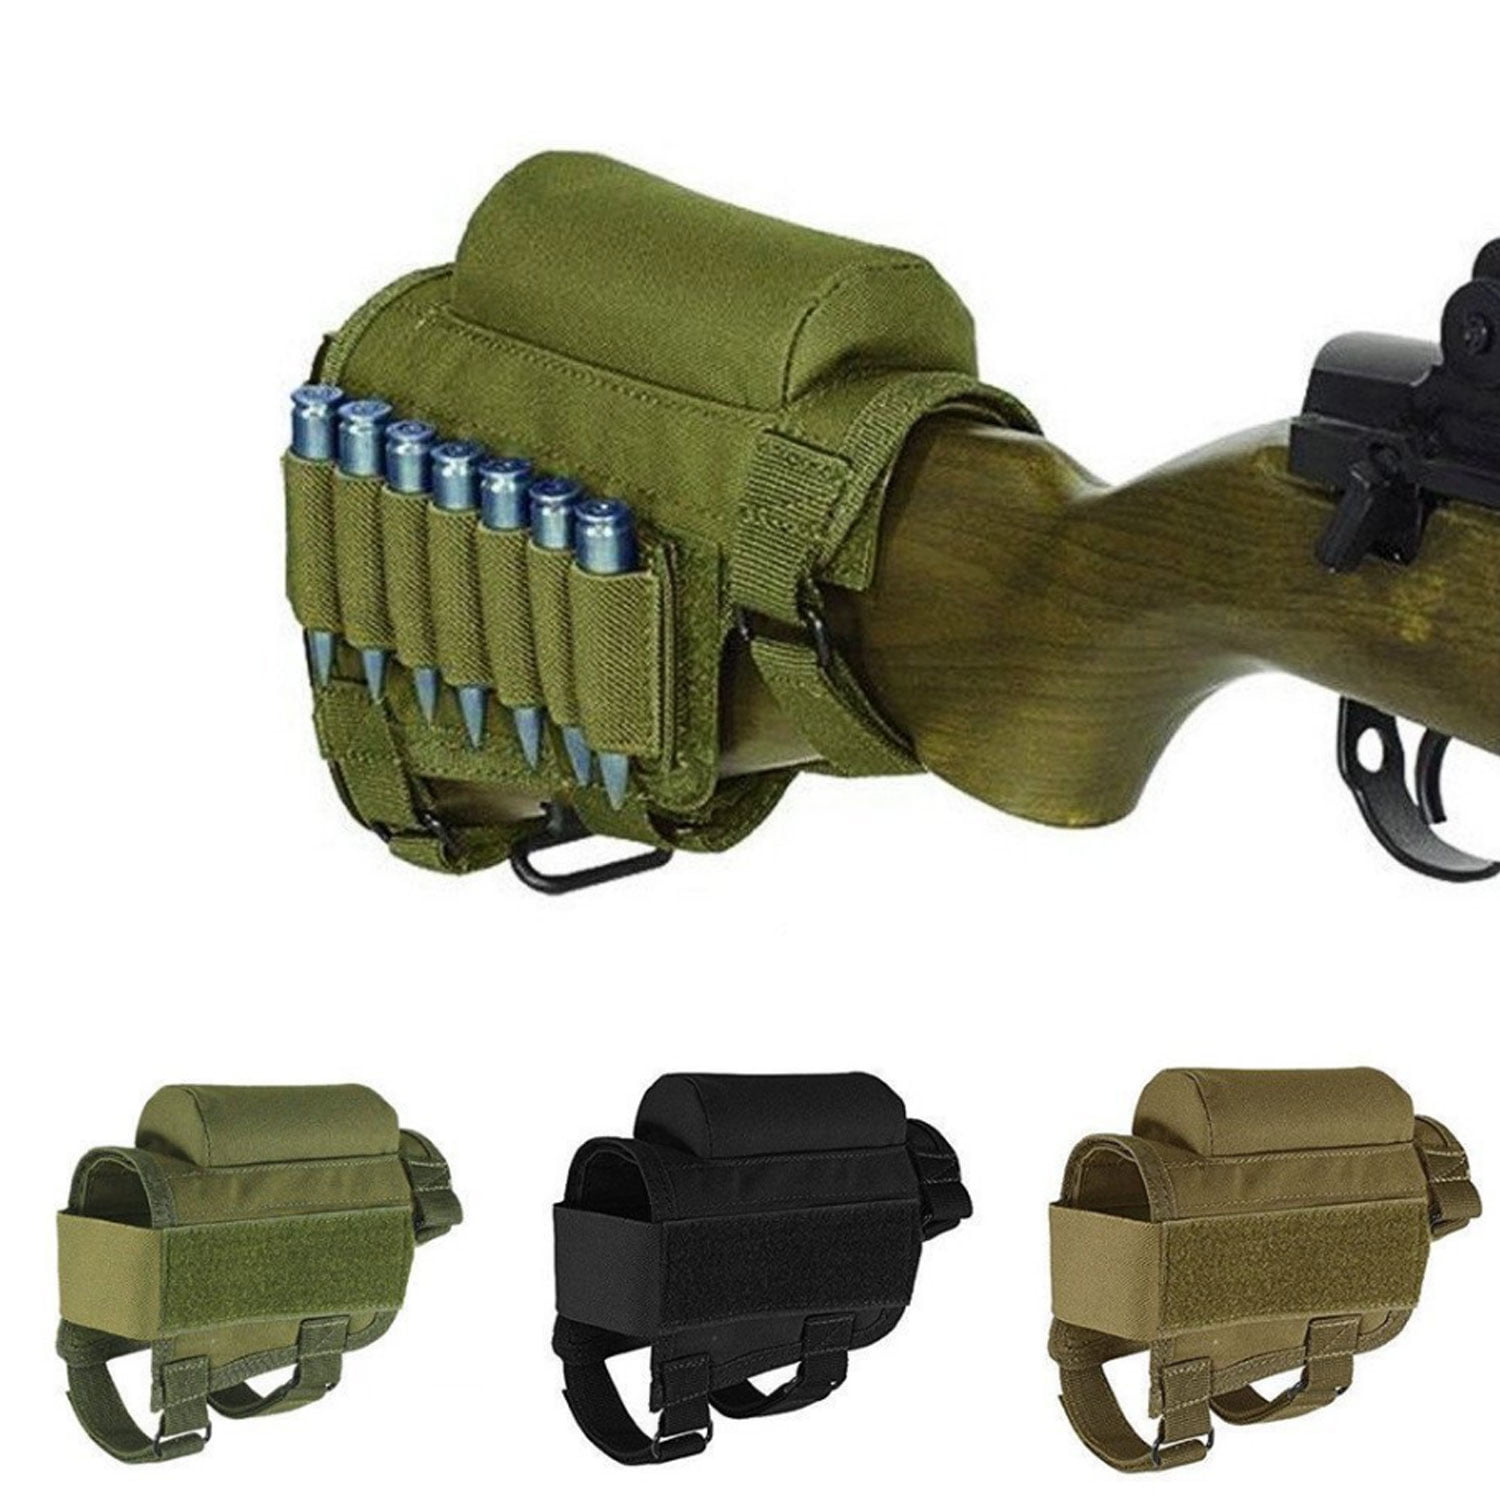 Portable Adjustable Tactical Butt Stock Rifle Cheek Rest Pouch Holder Pack 